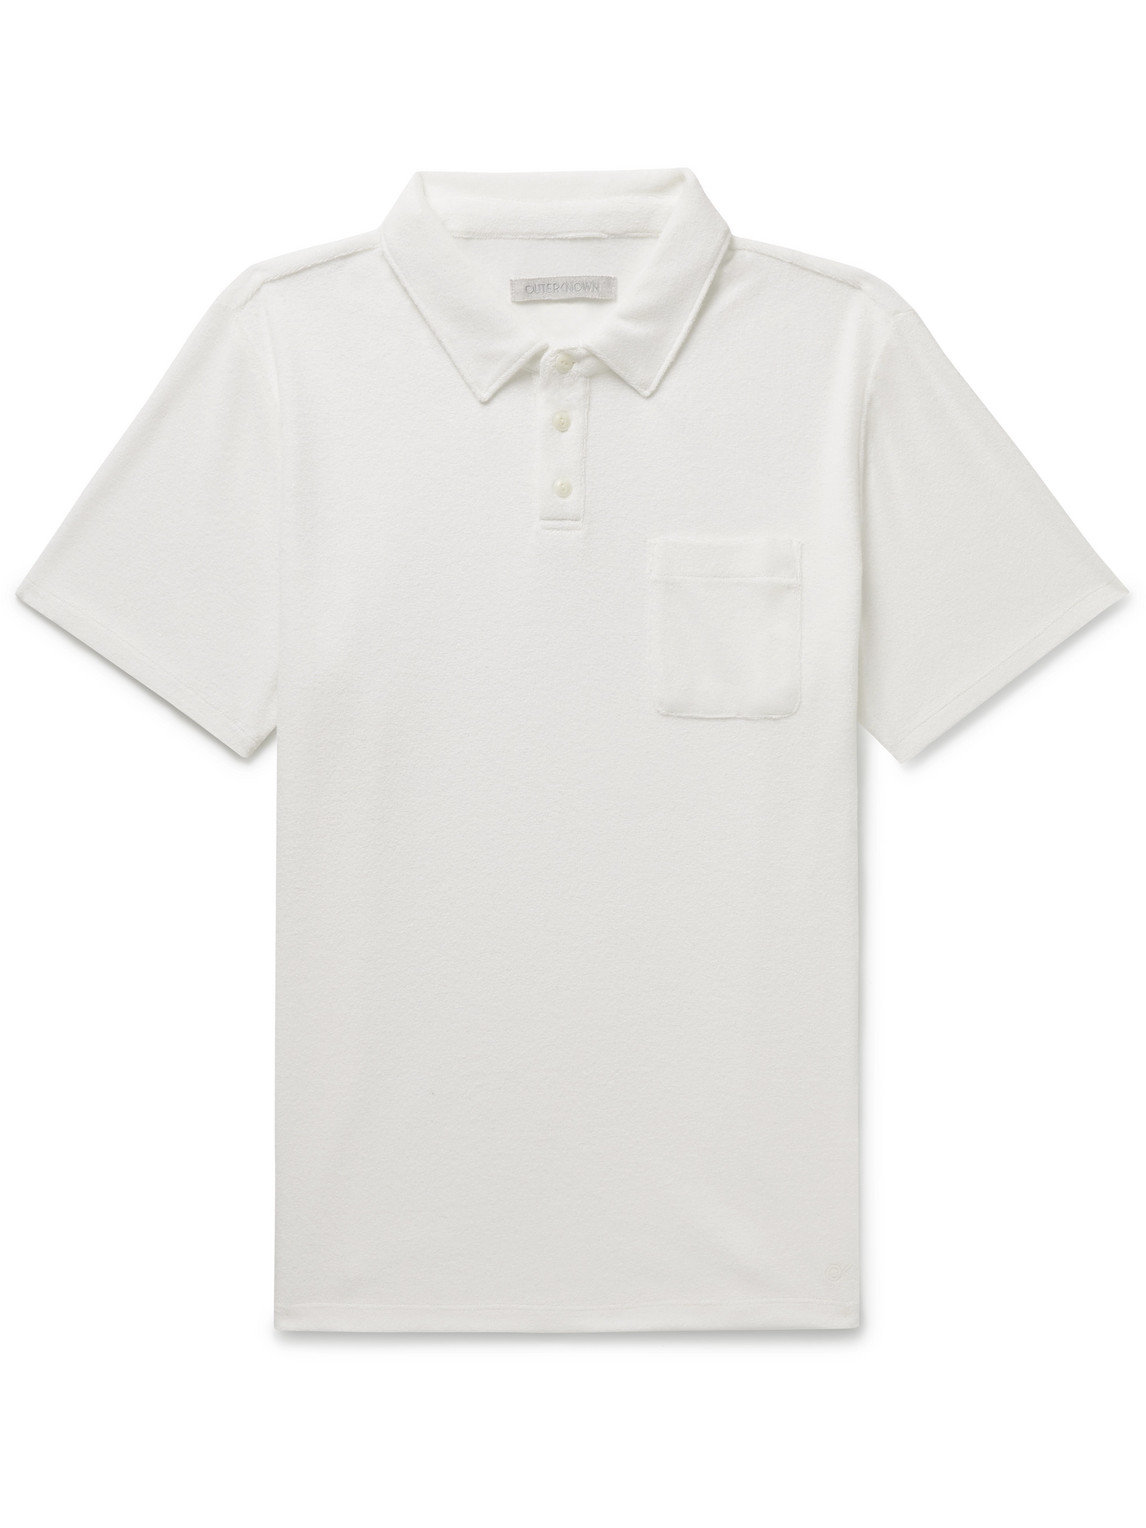 Outerknown Hightide Organic Cotton-blend Terry Polo Shirt In White